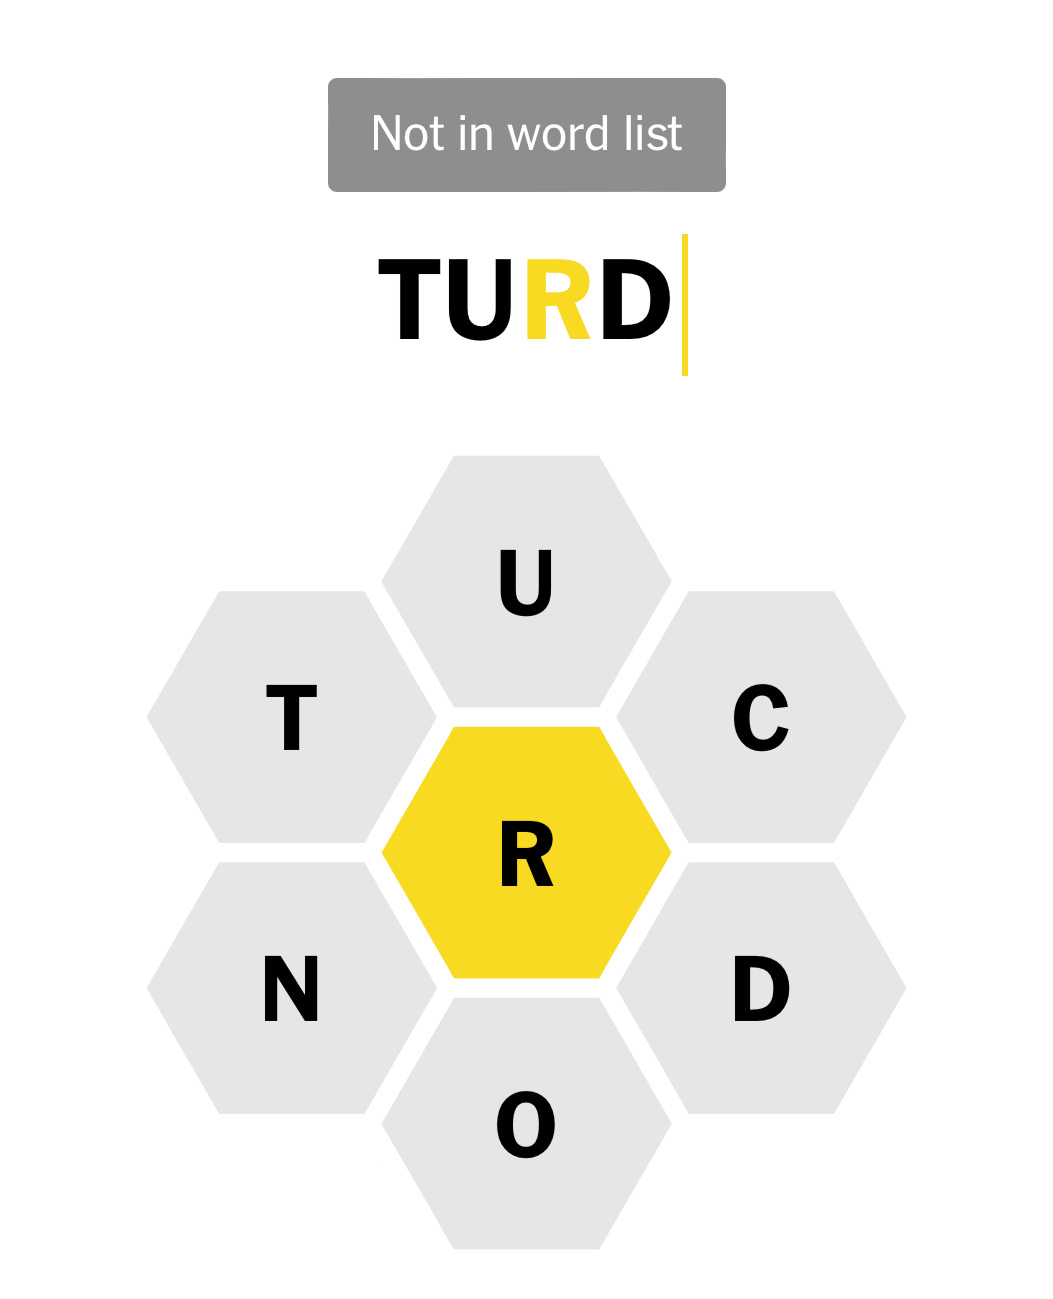 Screenshot of NYT's Spelling Bee game, indicating that the word "turd" is "not in word list."&10;&10;That's crap.